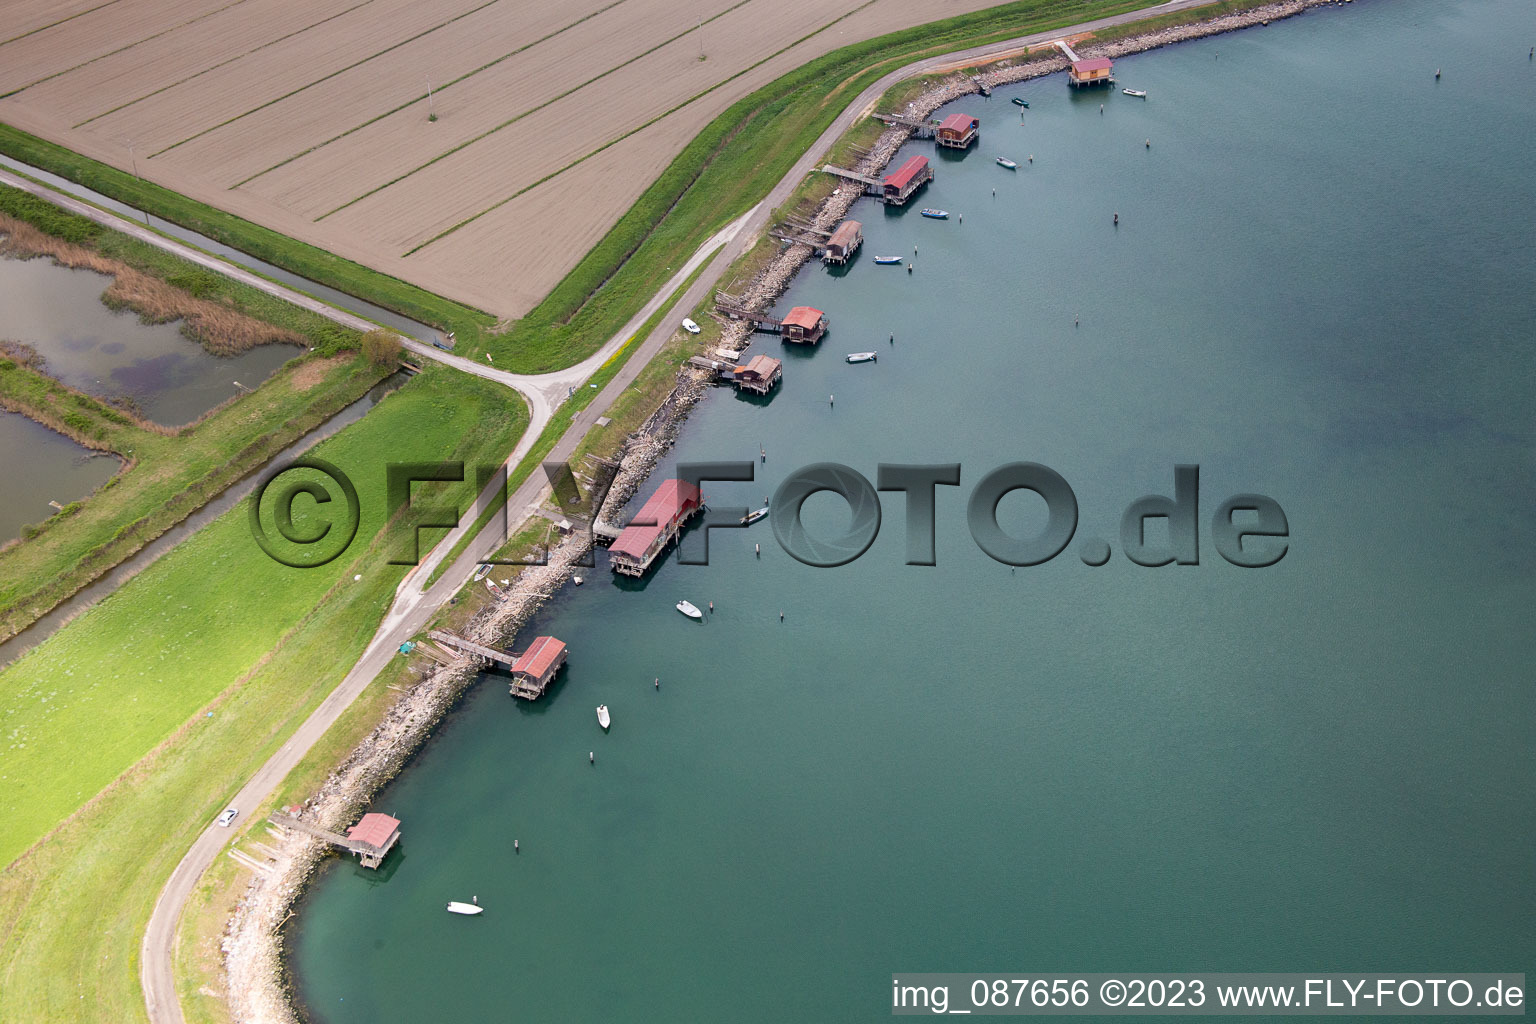 Porto Tolle in the state Veneto, Italy seen from above